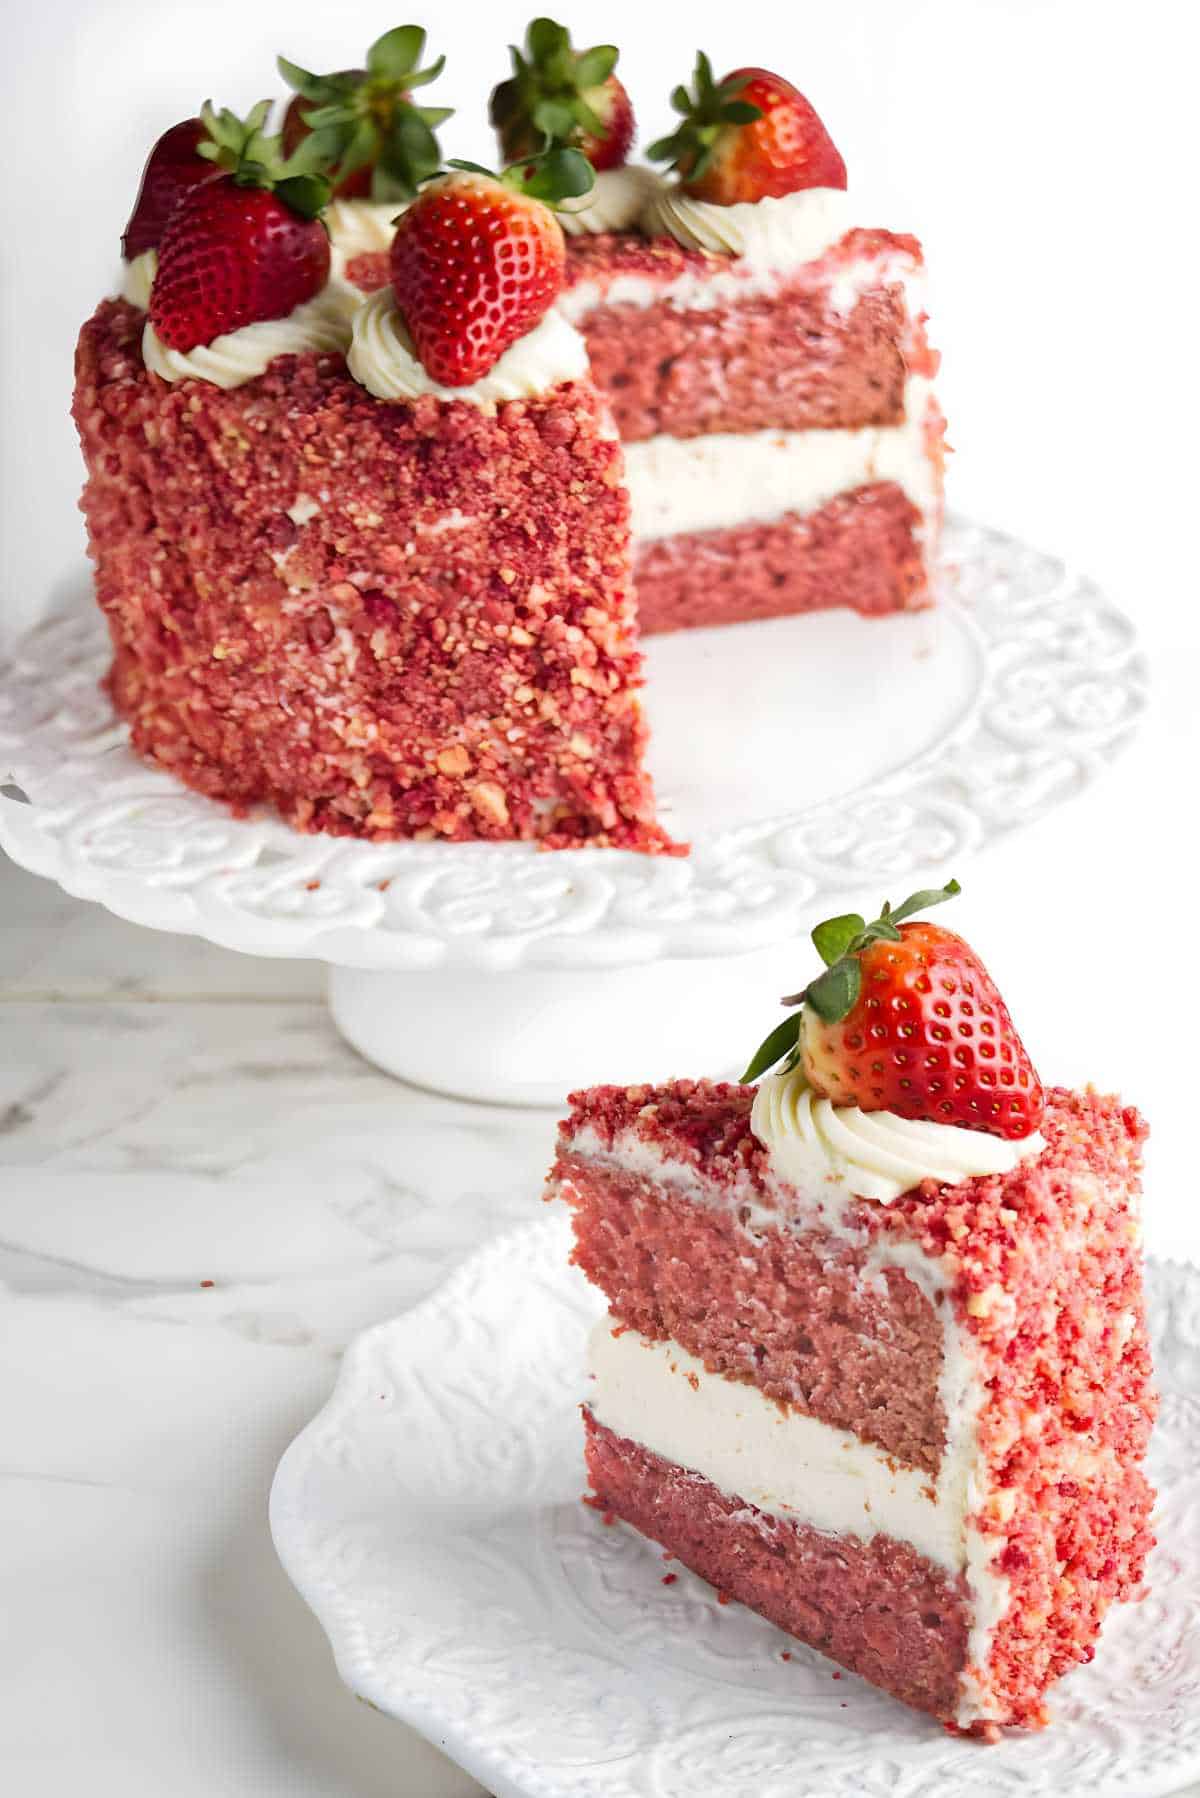 Strawberry crunch cake on a pedestal with a slice on a plate.